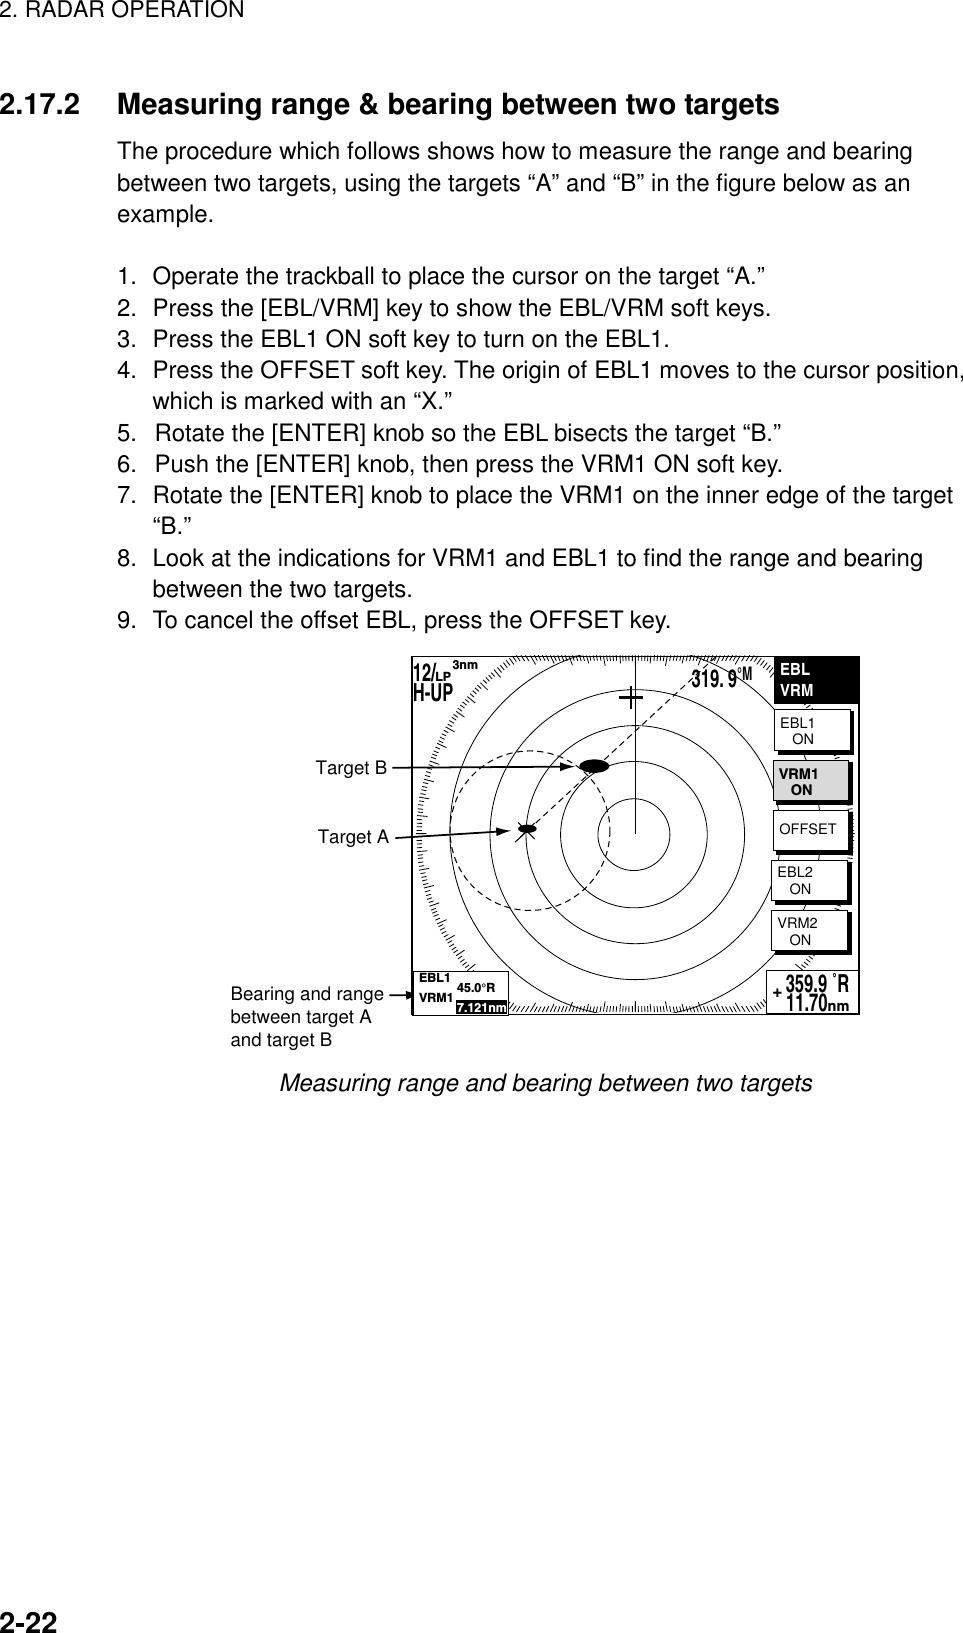 2. RADAR OPERATION    2-222.17.2  Measuring range &amp; bearing between two targets The procedure which follows shows how to measure the range and bearing between two targets, using the targets “A” and “B” in the figure below as an example.   1.  Operate the trackball to place the cursor on the target “A.” 2.  Press the [EBL/VRM] key to show the EBL/VRM soft keys. 3.  Press the EBL1 ON soft key to turn on the EBL1. 4.  Press the OFFSET soft key. The origin of EBL1 moves to the cursor position, which is marked with an “X.” 5.  Rotate the [ENTER] knob so the EBL bisects the target “B.” 6.  Push the [ENTER] knob, then press the VRM1 ON soft key. 7.  Rotate the [ENTER] knob to place the VRM1 on the inner edge of the target “B.” 8.  Look at the indications for VRM1 and EBL1 to find the range and bearing between the two targets. 9.  To cancel the offset EBL, press the OFFSET key. EBLVRMEBL1   ONVRM2   ON359.9 ˚R 11.70nm+Target ATarget BBearing and rangebetween target Aand target BVRM1   ONOFFSETEBL2   ONEBL1           45.0°RVRM1           7.121nm12/        H-UP      3nmLP319. 9°M Measuring range and bearing between two targets    